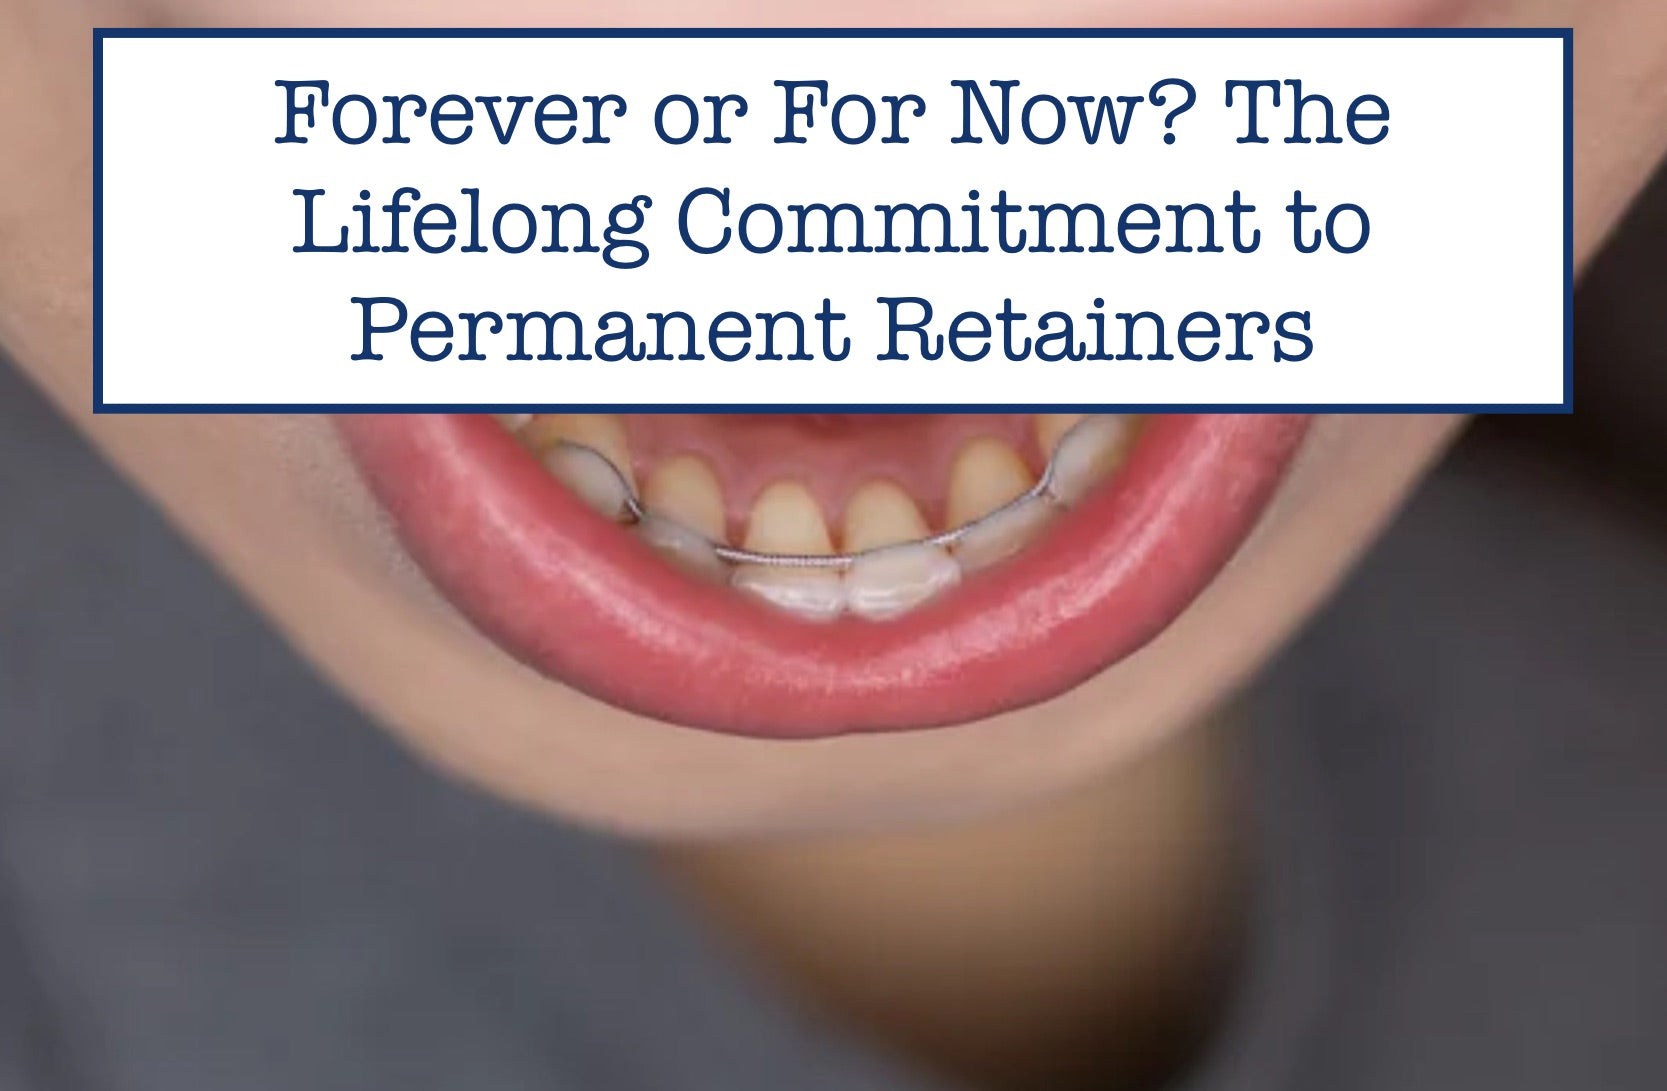 Forever or For Now? The Lifelong Commitment to Permanent Retainers